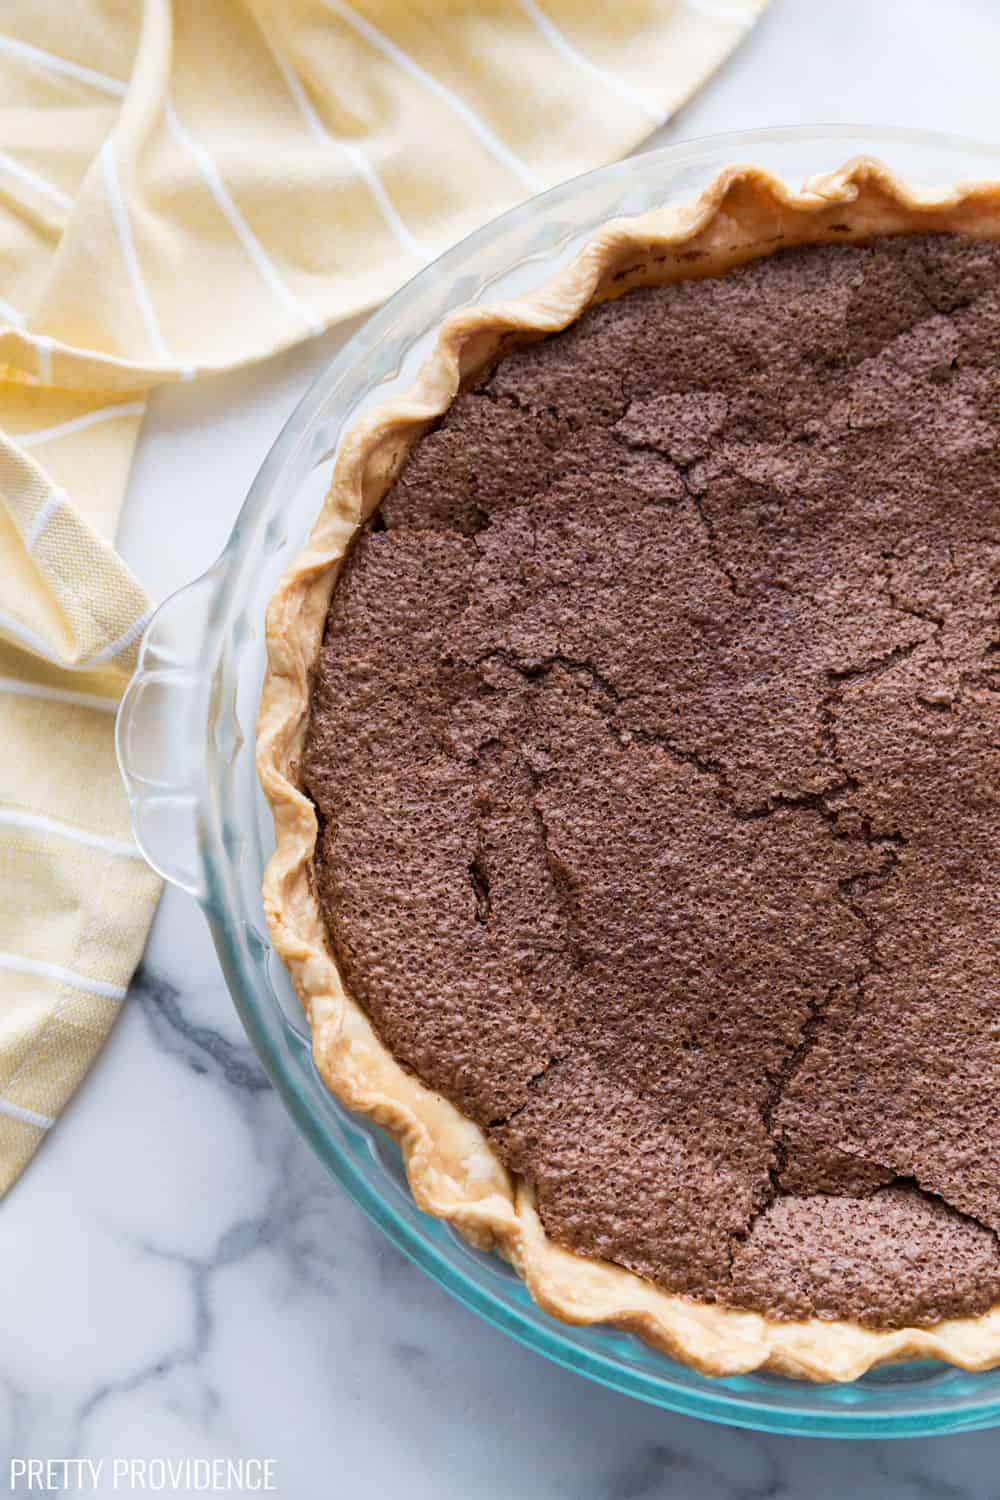 Chocolate Chess Pie, just baked in a clear pie dish on a marble surface.